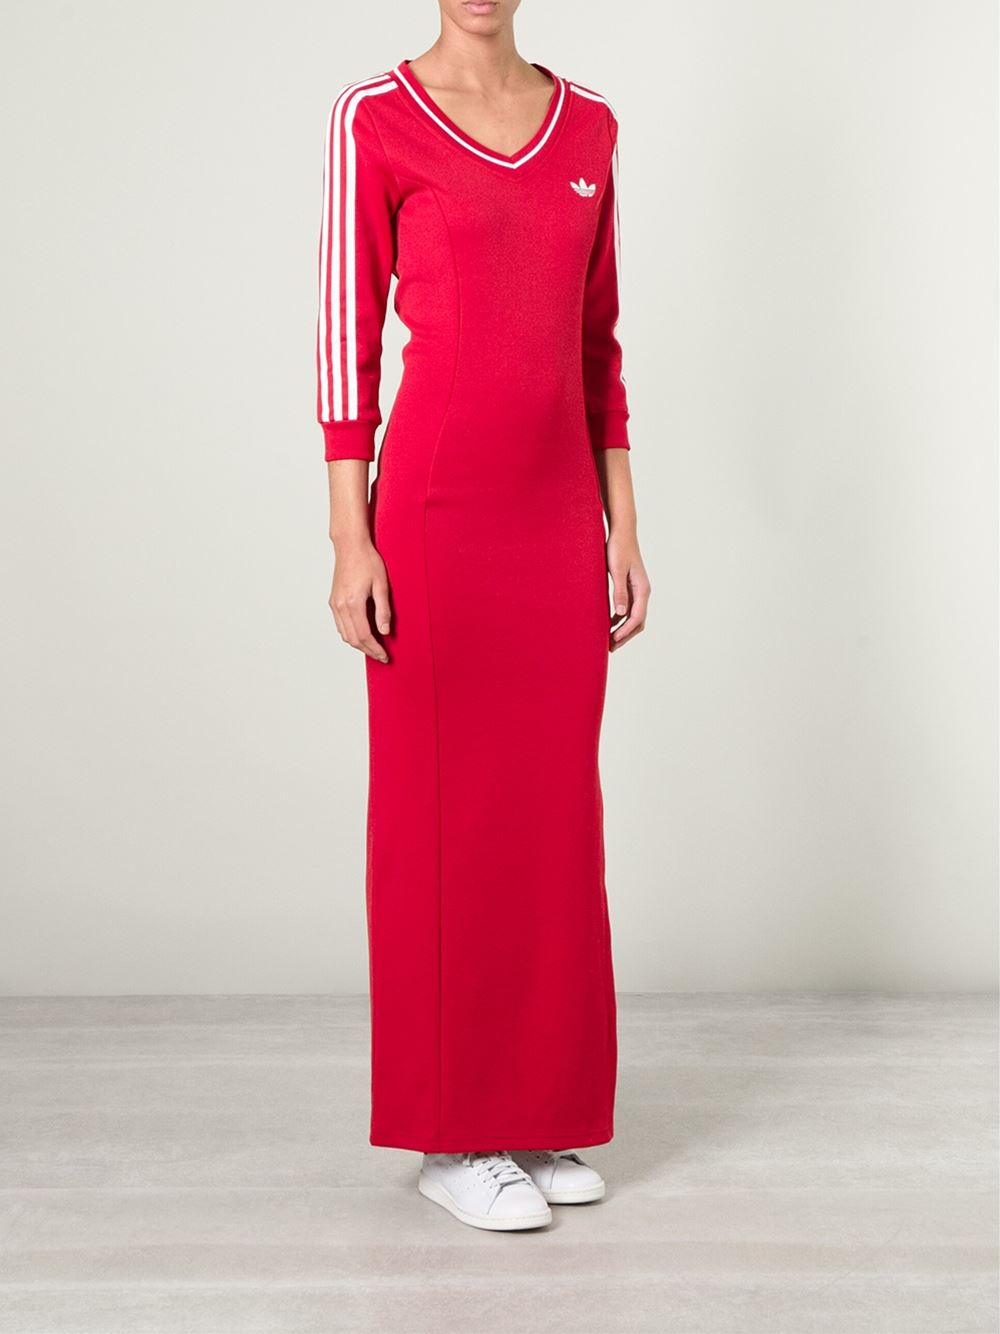 Indiferencia muestra Persona a cargo del juego deportivo adidas Long Line Jersey Dress in Red | Lyst